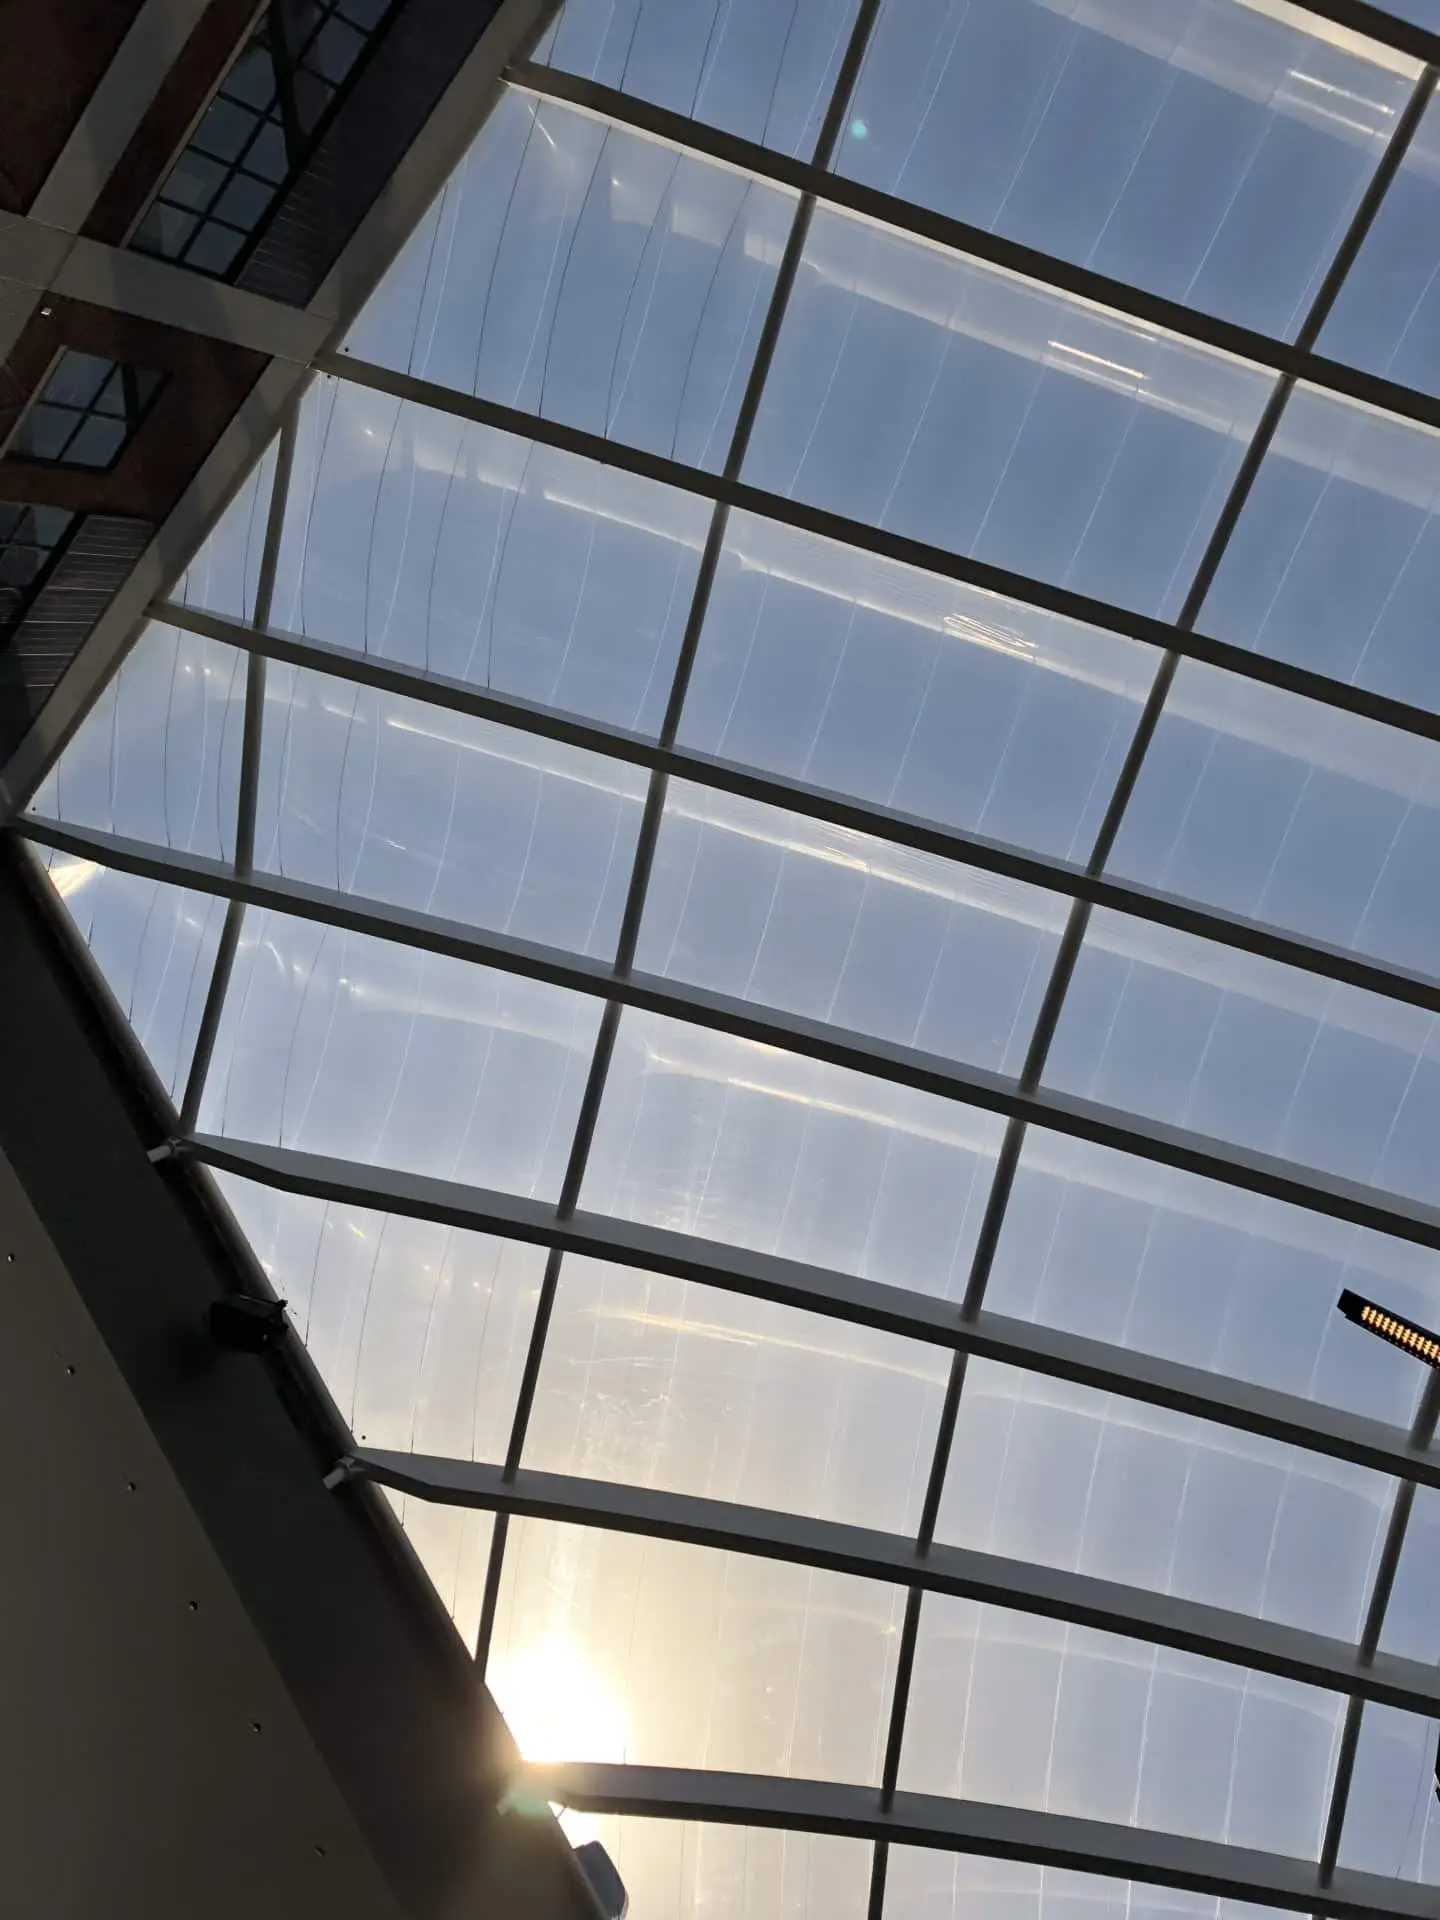 Controlled sunlight peeking through the ETFE Via Concourse roof
